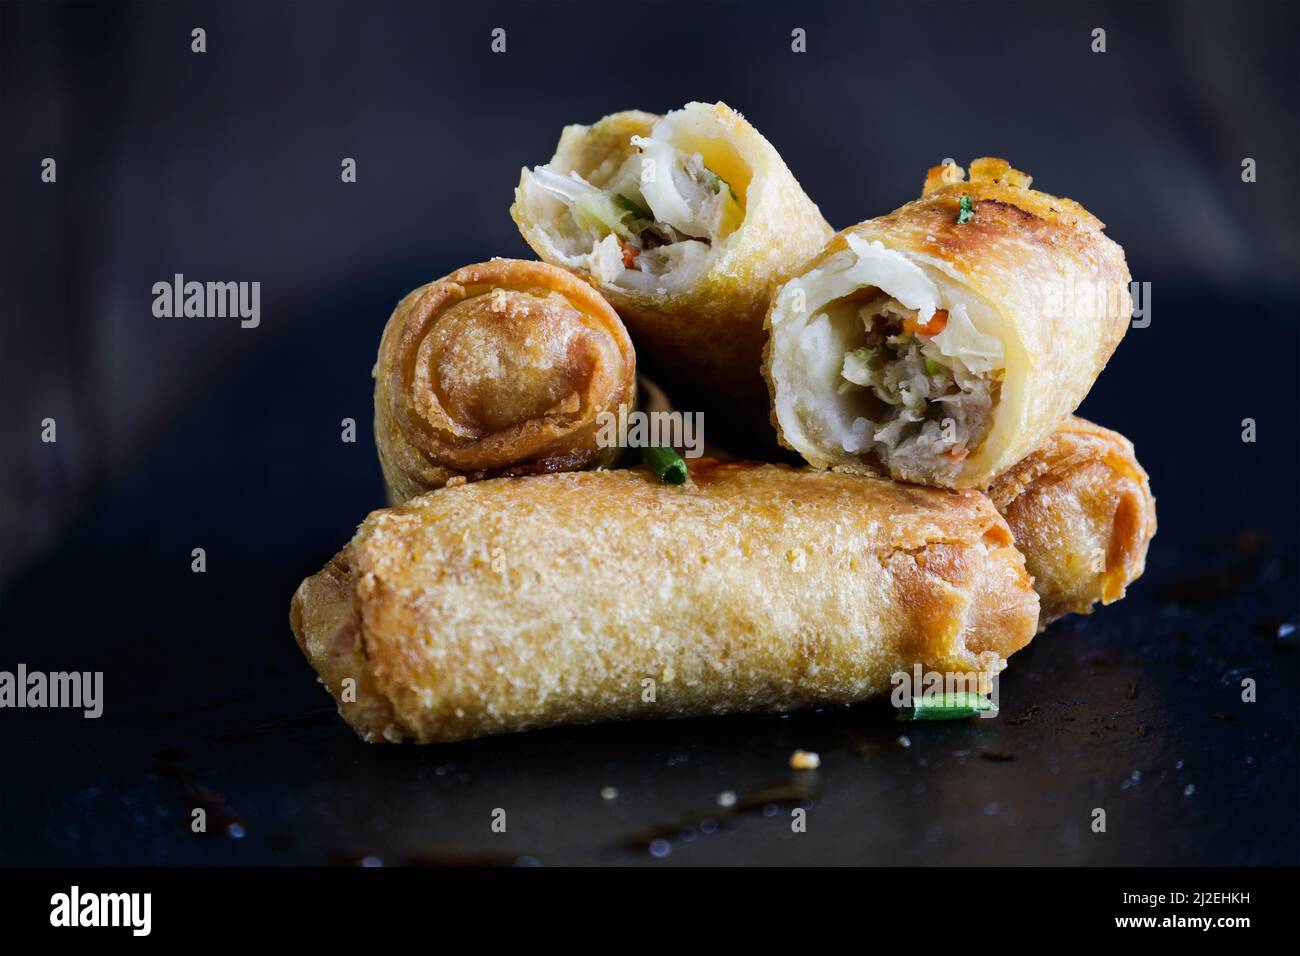 Fresh stack of egg rolls. Top eggroll is broken open to see the ingredients inside.Selective focus with blurred foreground and background. Stock Photo